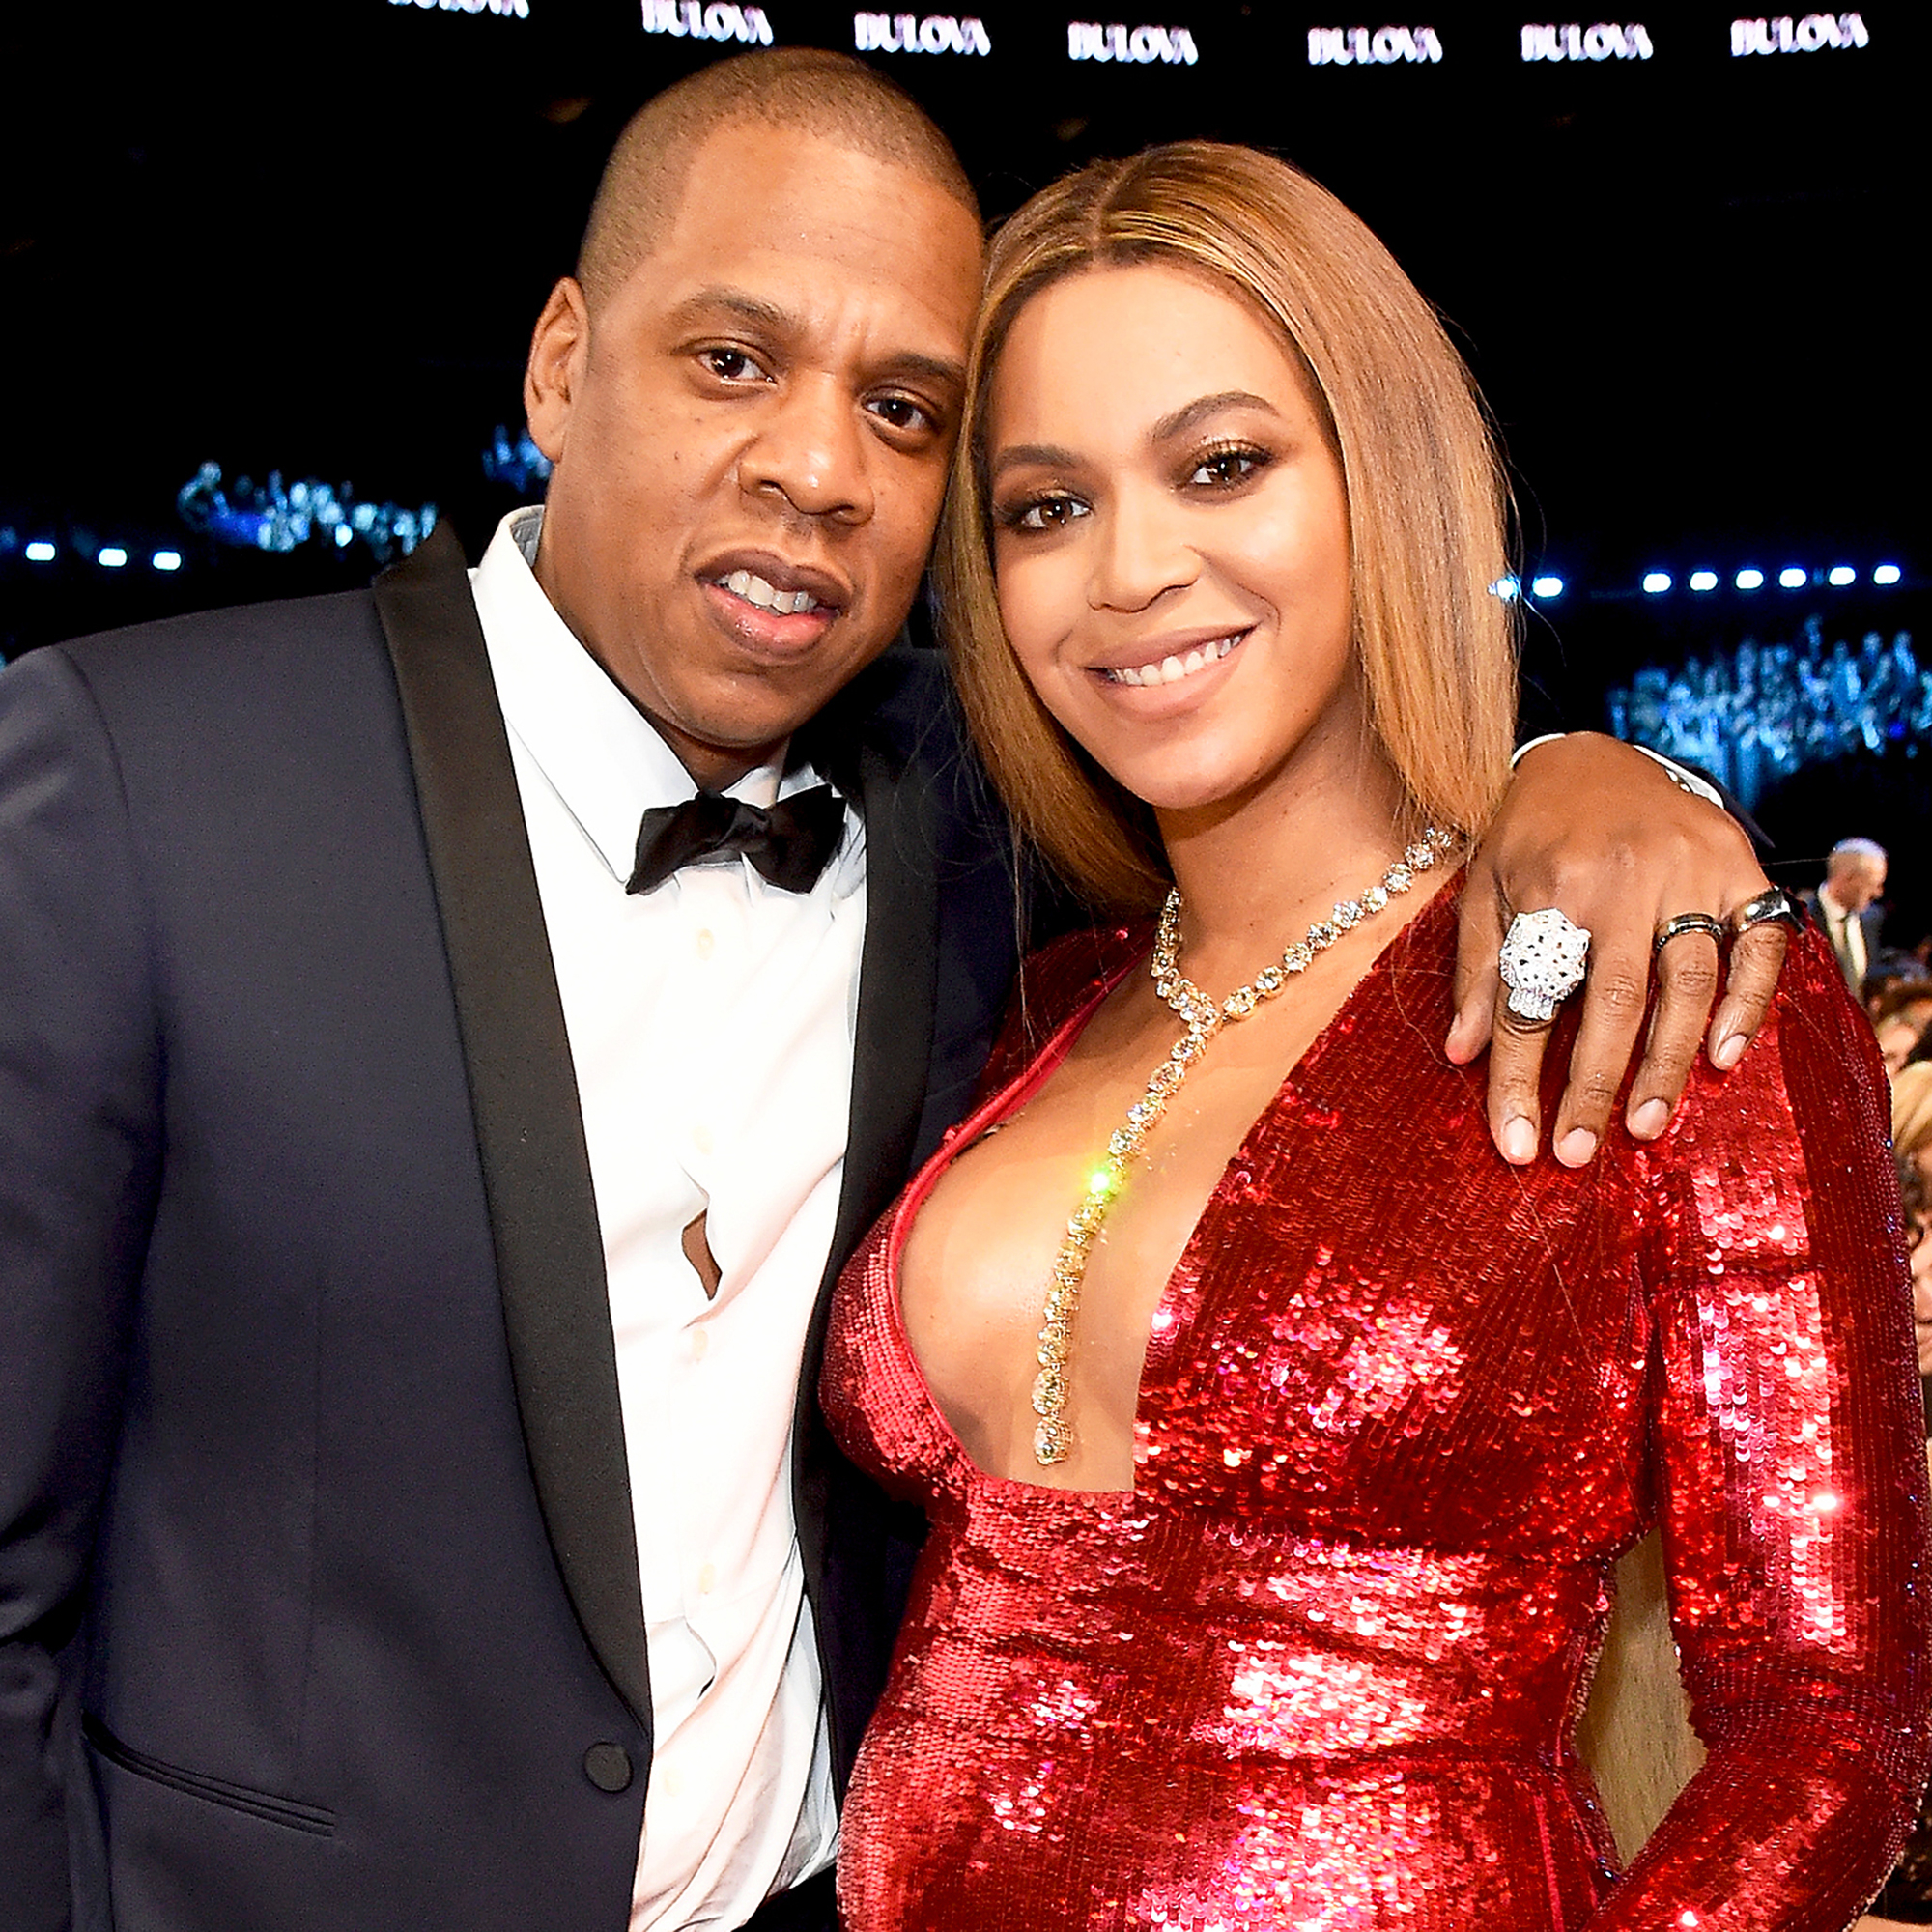 Beyonce and Jay-Z's Twins: Find Out Who Was Born First